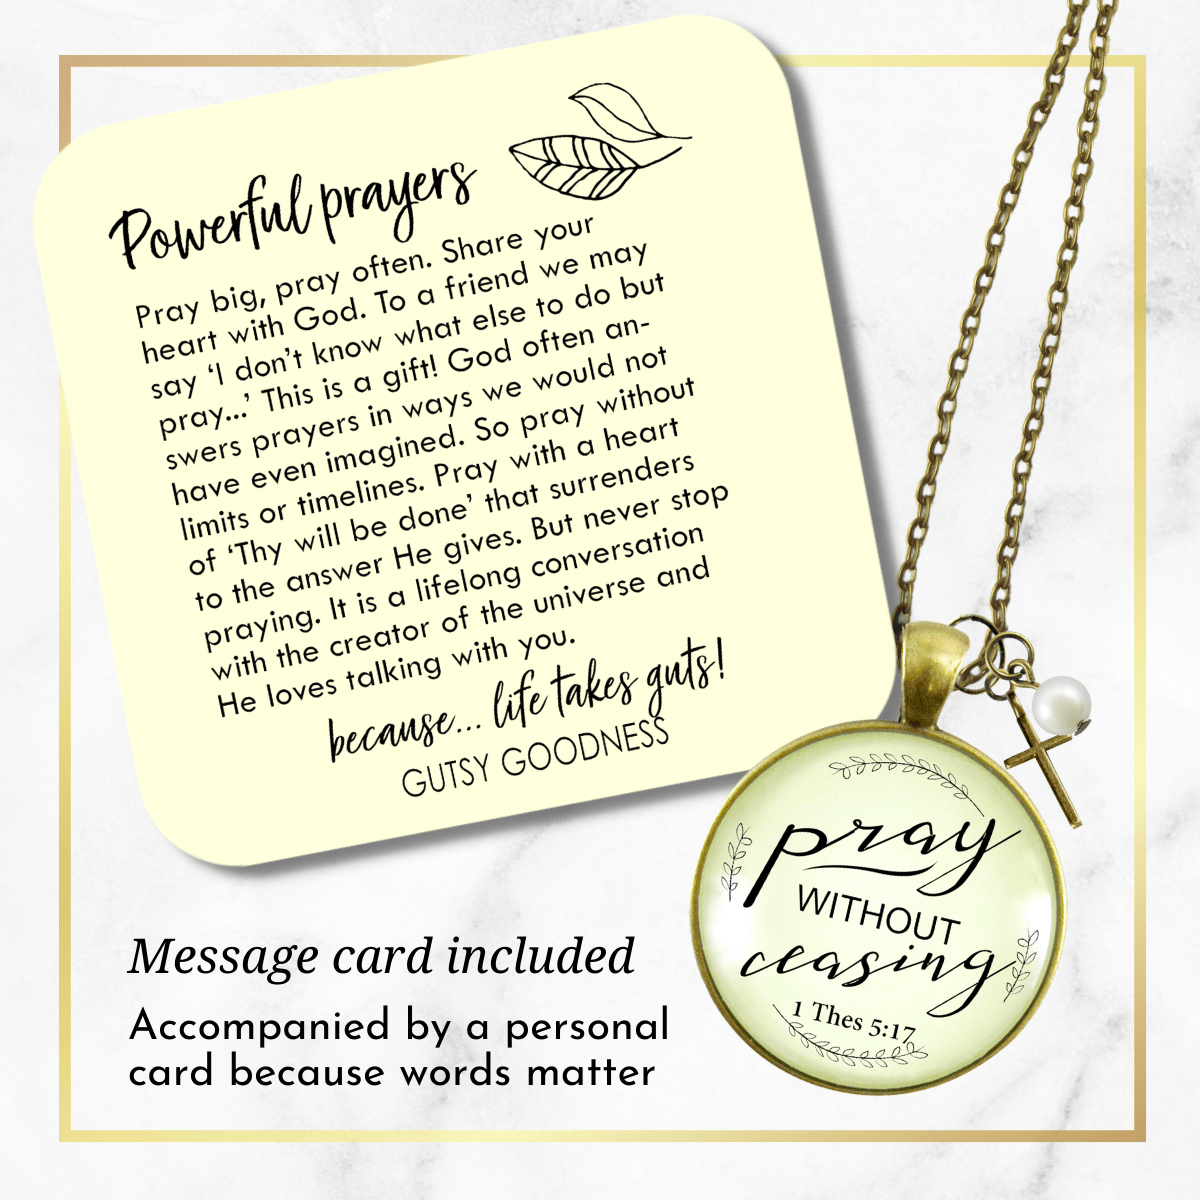 Gutsy Goodness Pray Without Ceasing Faith Prayer Cross Necklace Christian Jewelry - Gutsy Goodness;Pray Without Ceasing Faith Prayer Cross Necklace Christian Jewelry - Gutsy Goodness Handmade Jewelry Gifts